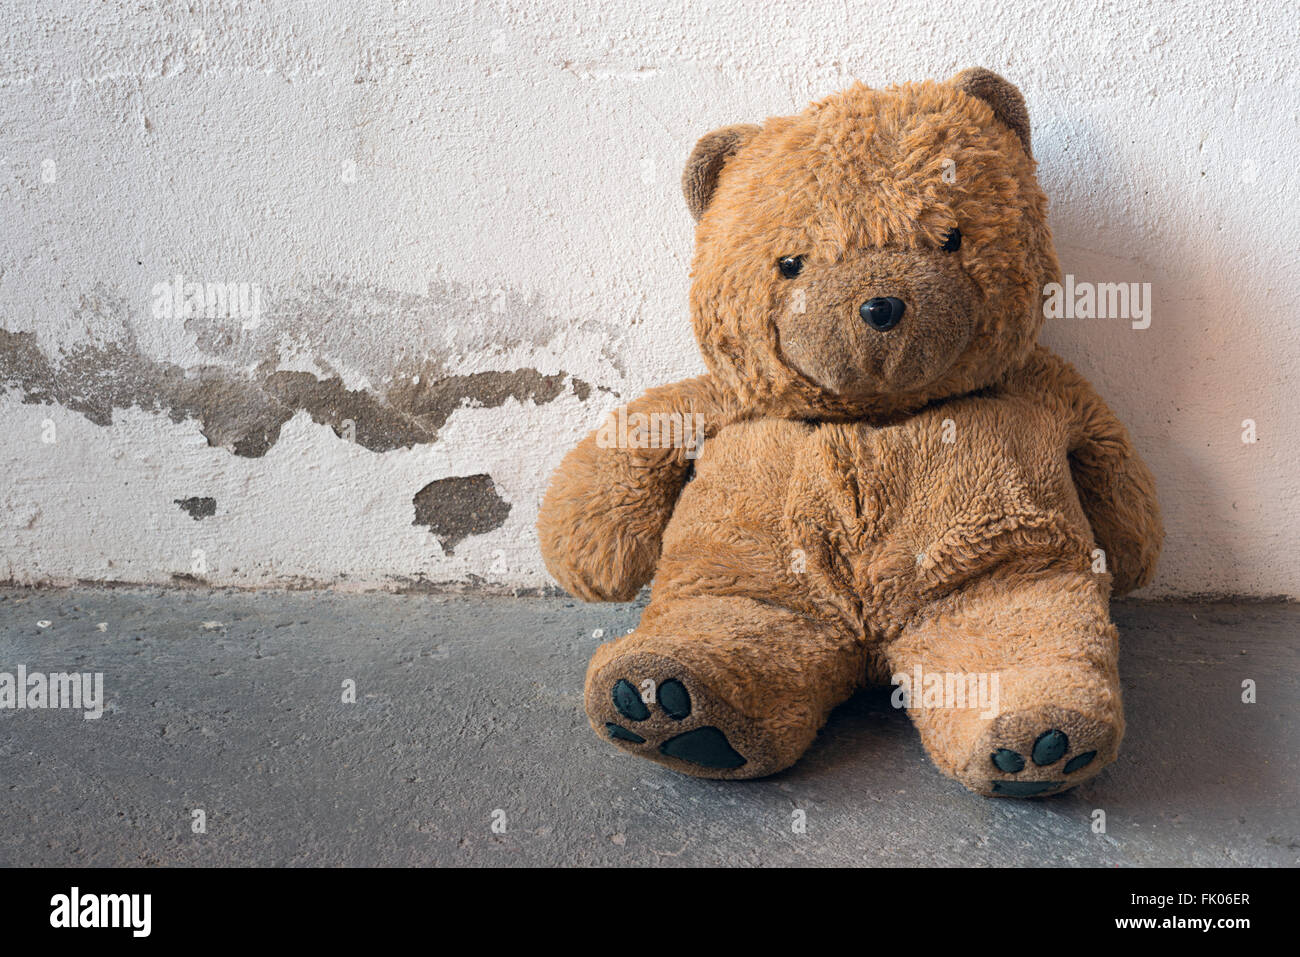 A old and dirty Teddy bear is sitting against a white concrete wall Stock Photo